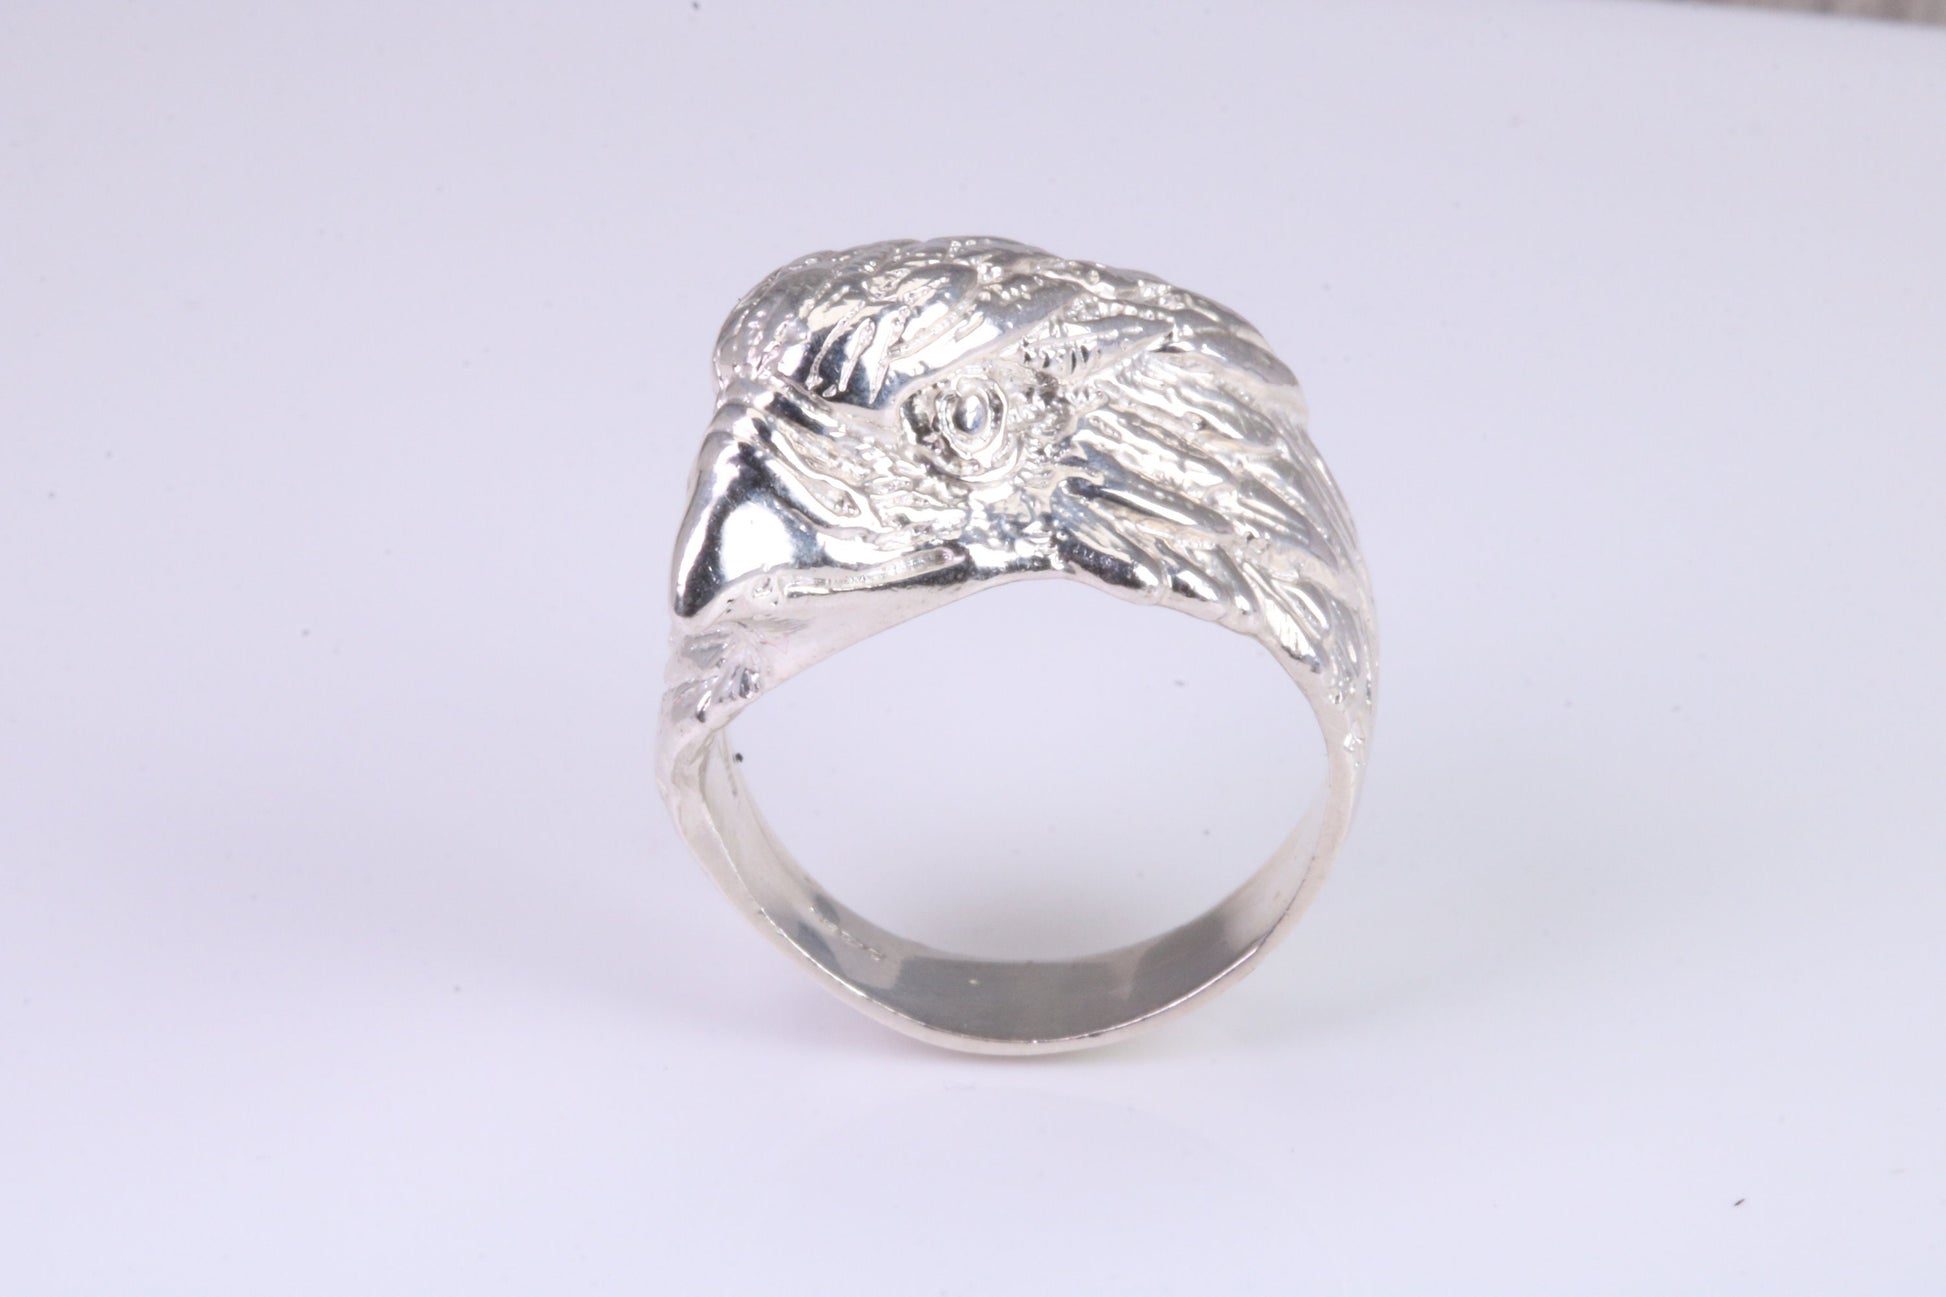 Large and heavy American Eagle head ring,solid silver, perfect for all age groups. Available in silver, yellow gold, white gold and platinum